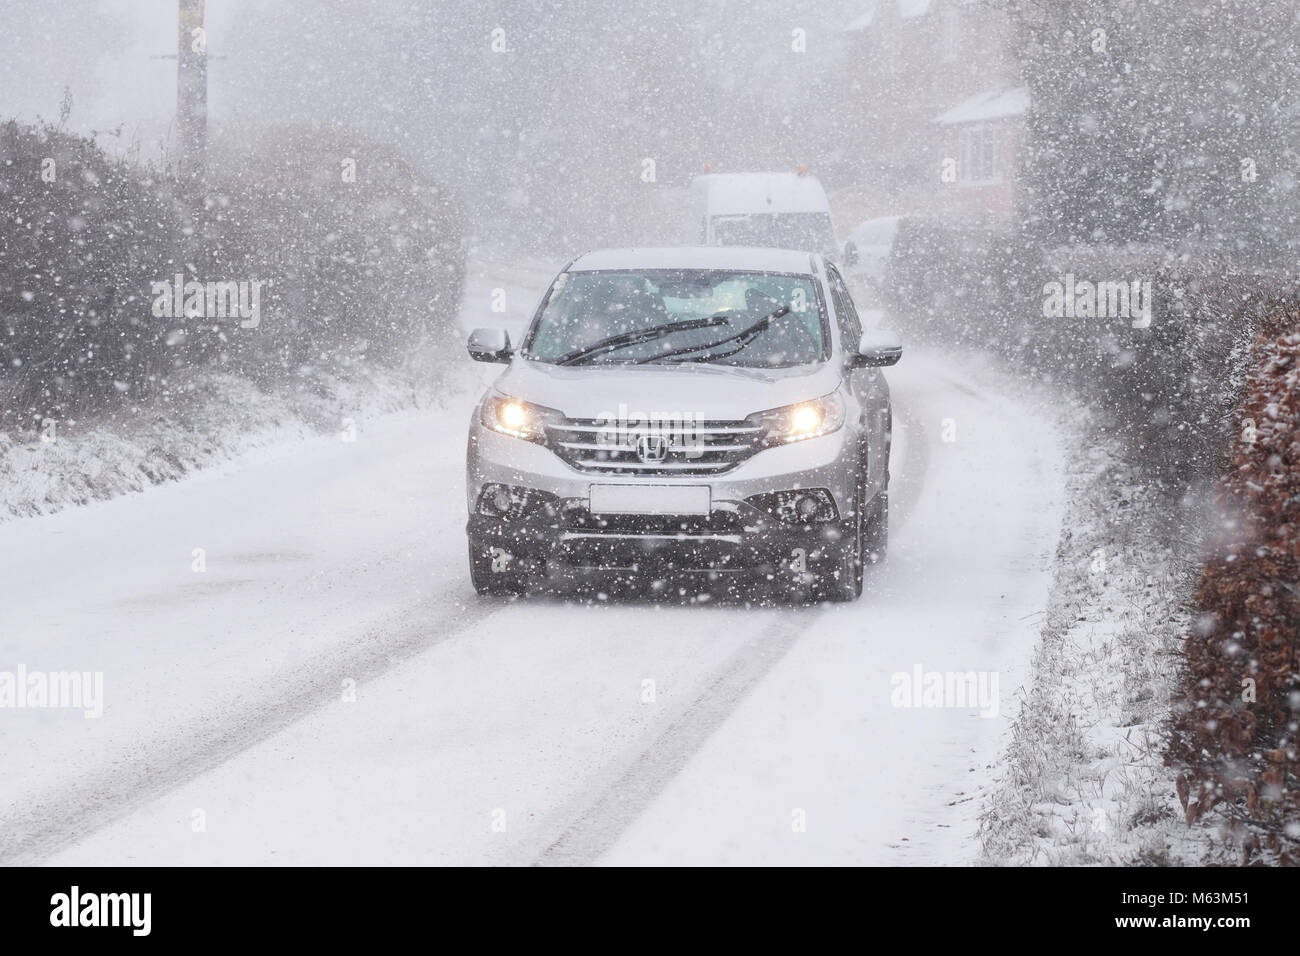 Titley, Herefordshire, UK - Wednesday 28th February 2018 - Heavy snow showers blowing in from the East at 4pm making driving conditions hazardous for car drivers in rural Herefordshire. Photo Steven May / Alamy Live News Stock Photo